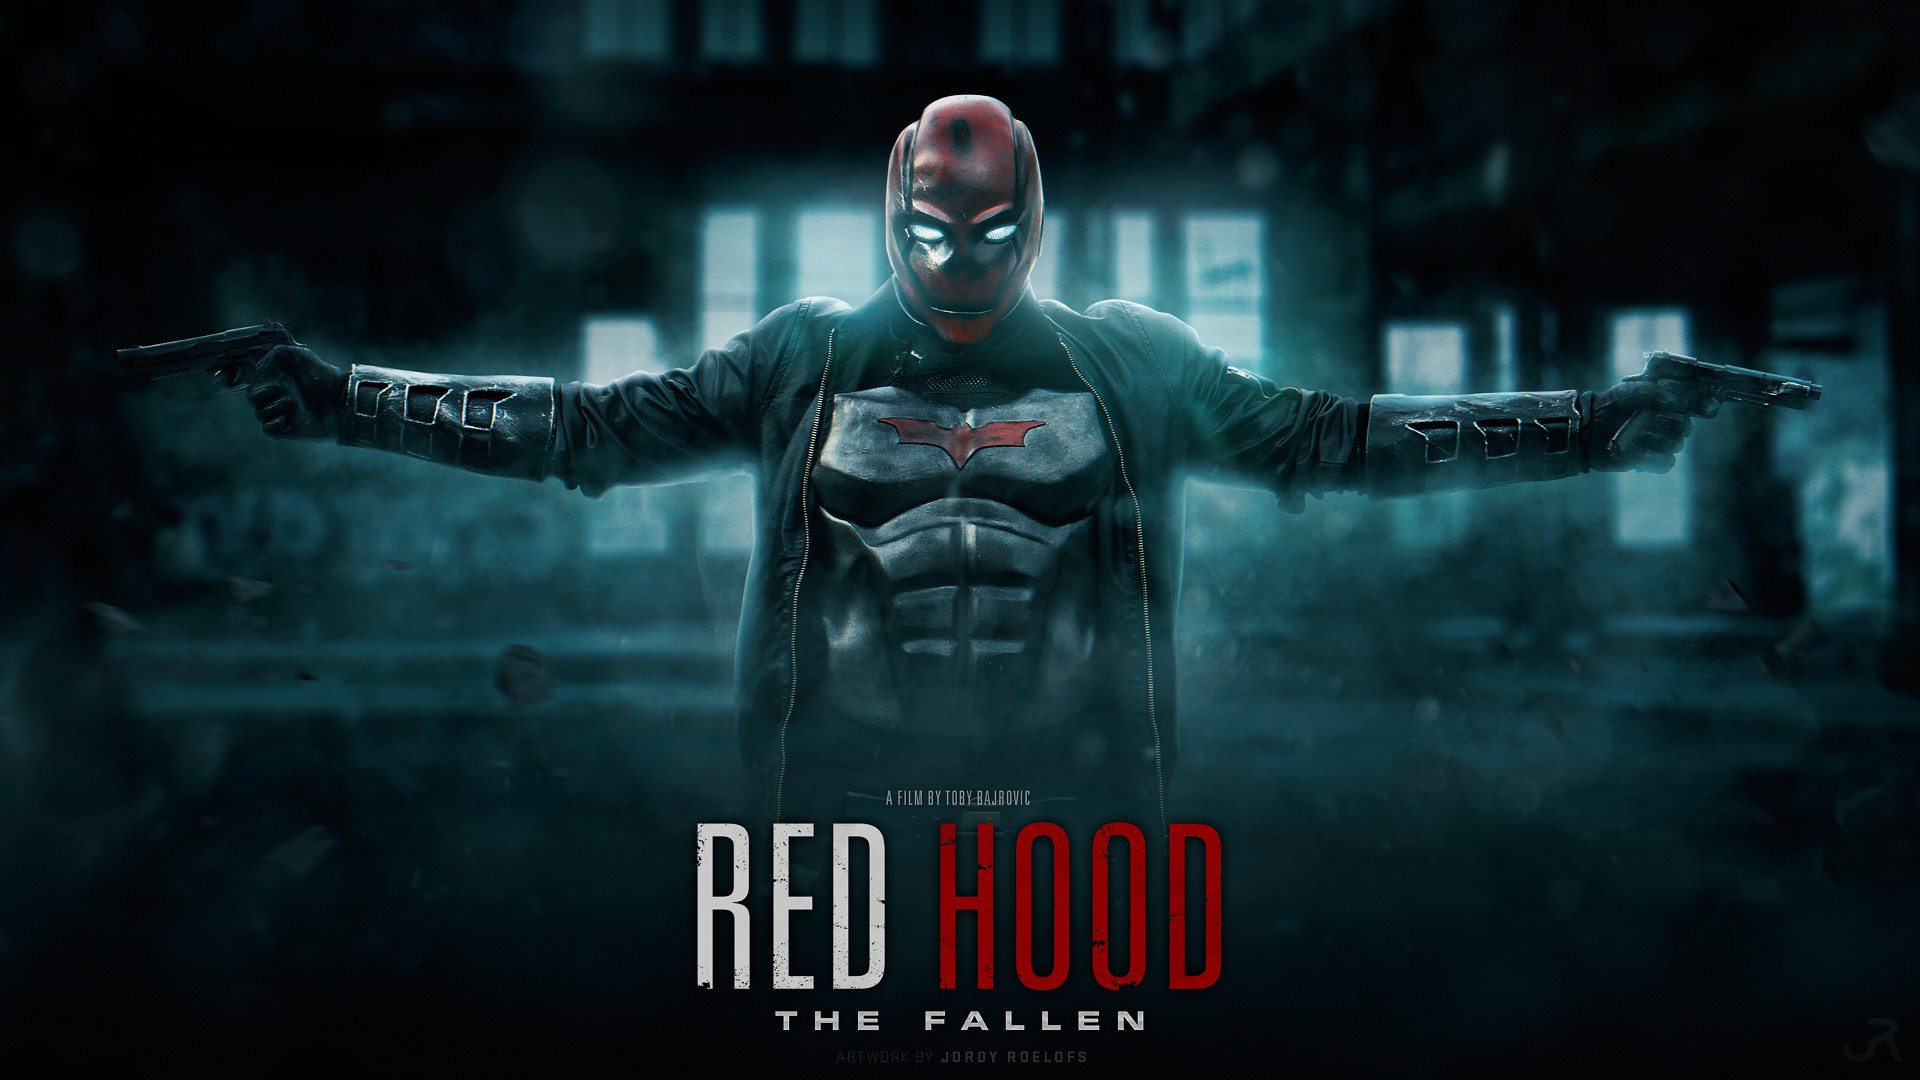 RED HOOD THE FALLEN – Wallpaper 1080P by visuasys